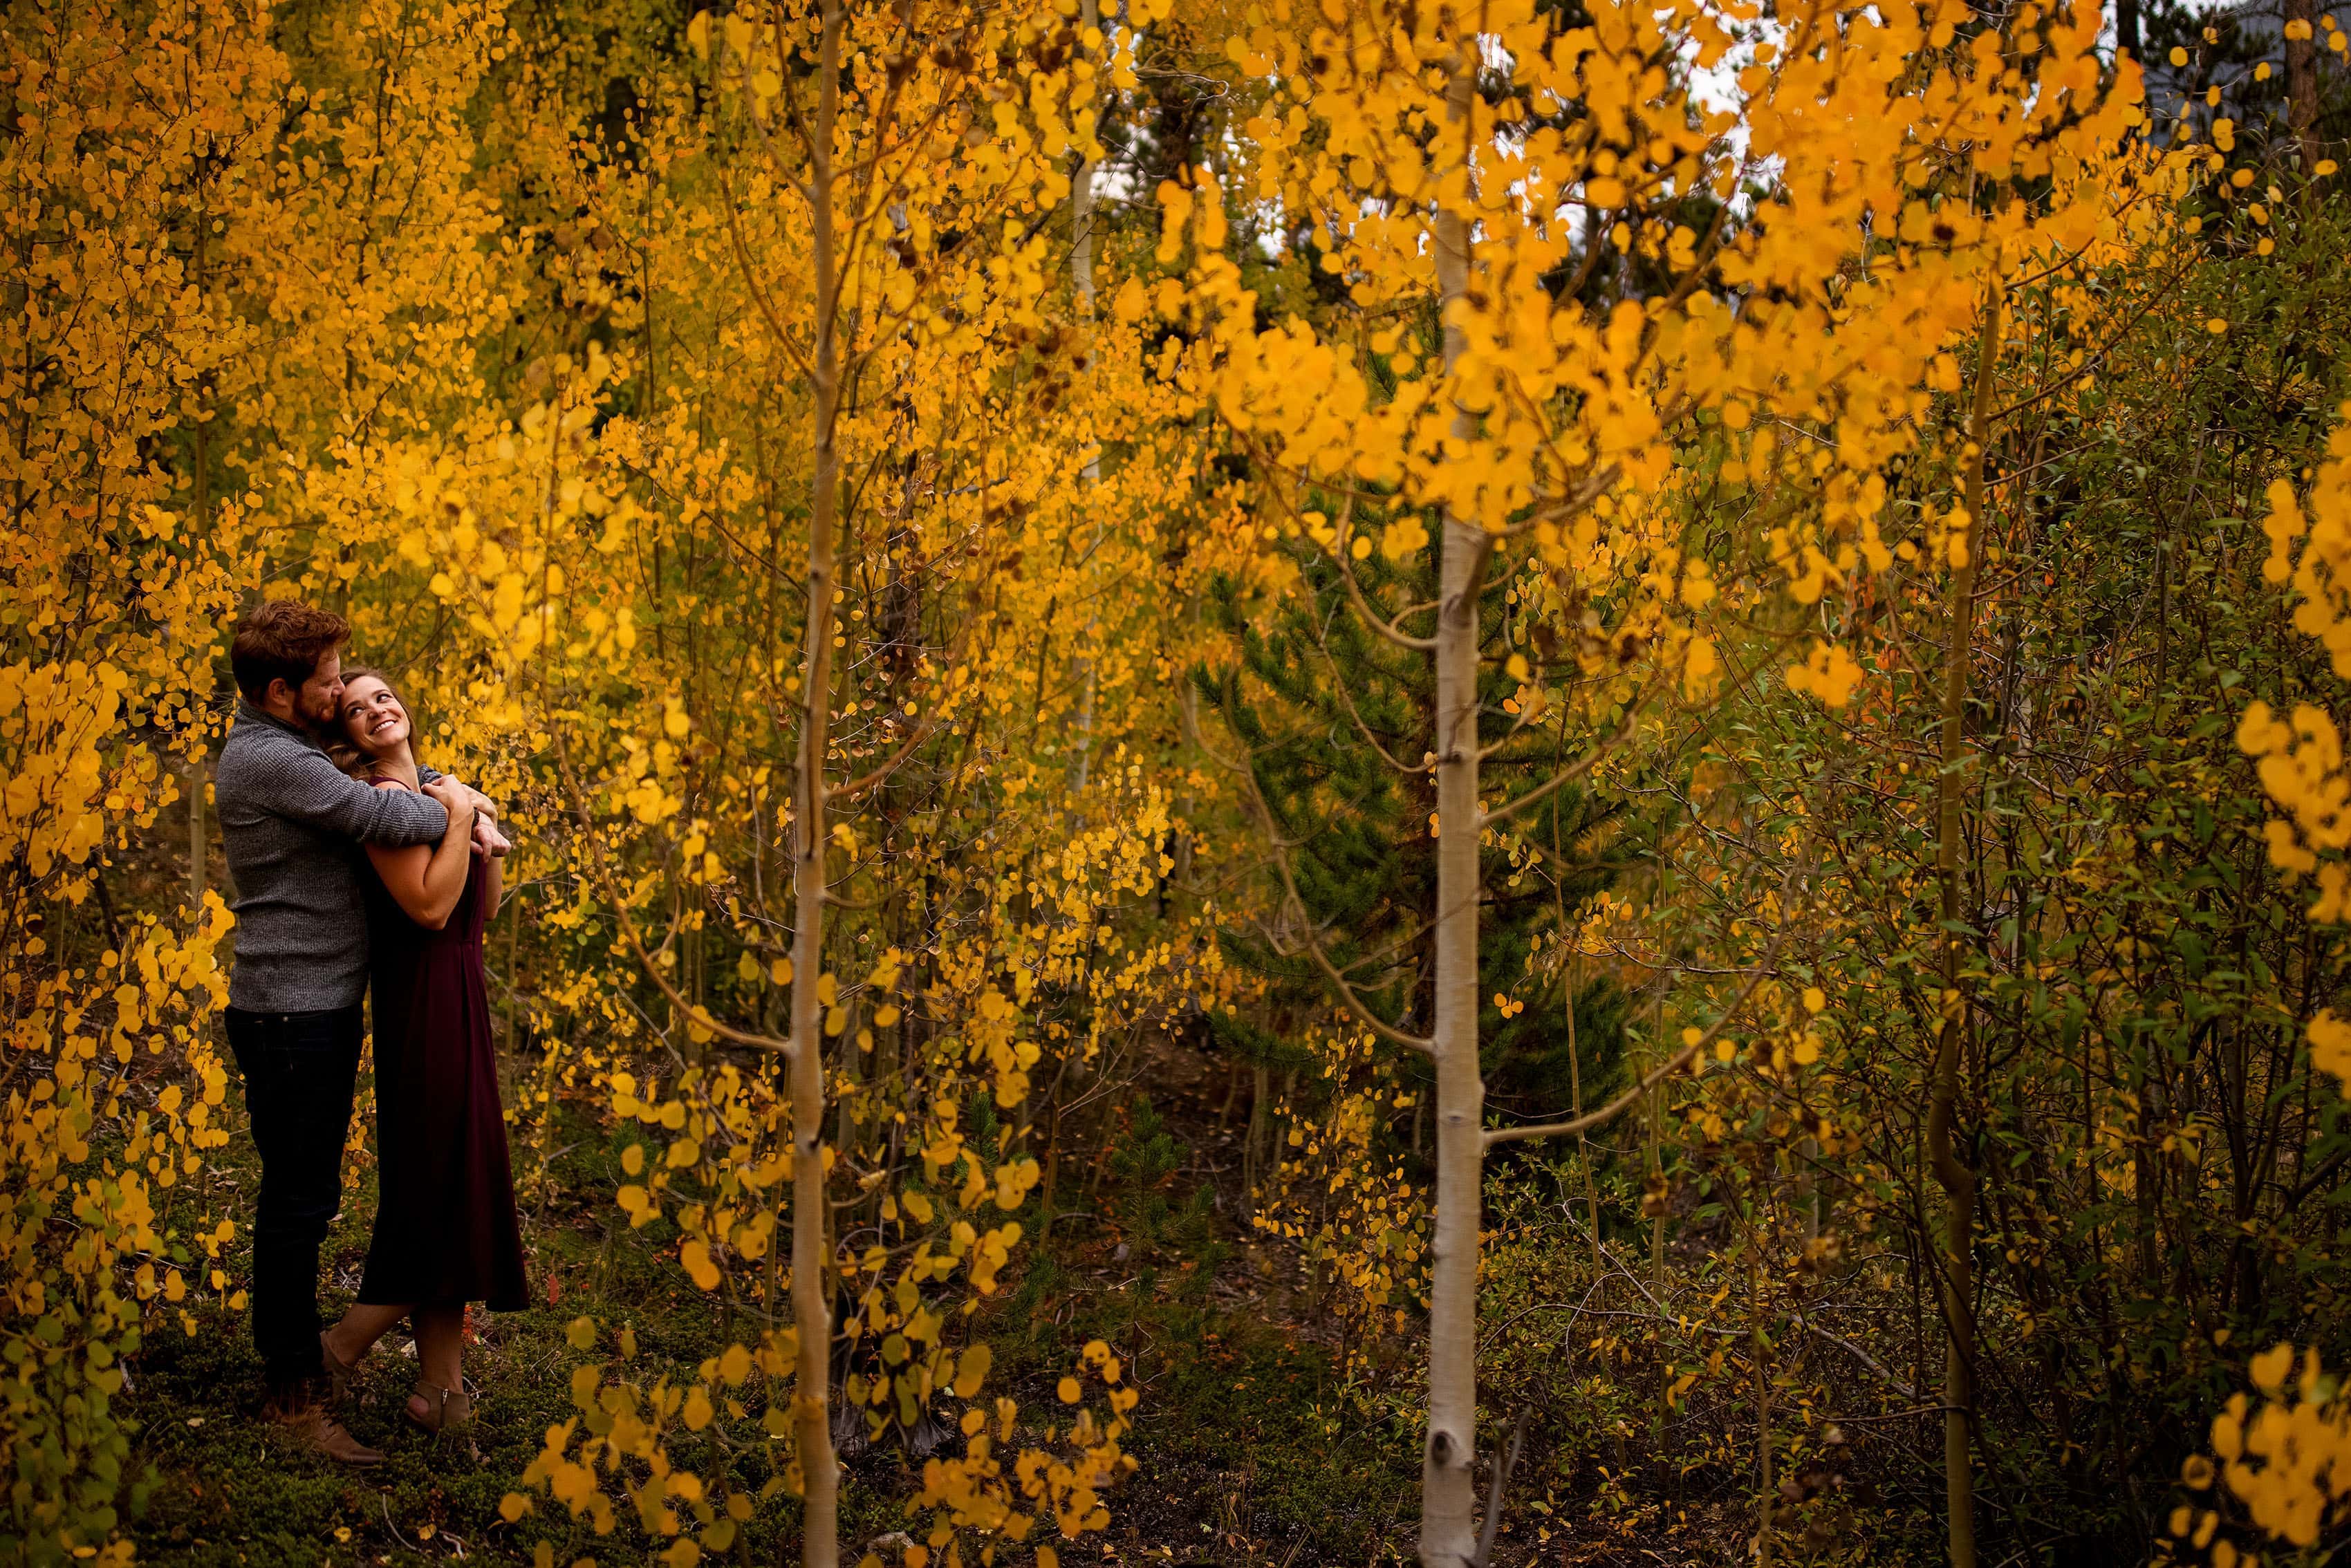 Darren and Casey enjoy a moment together while surrounded by colorful aspen trees